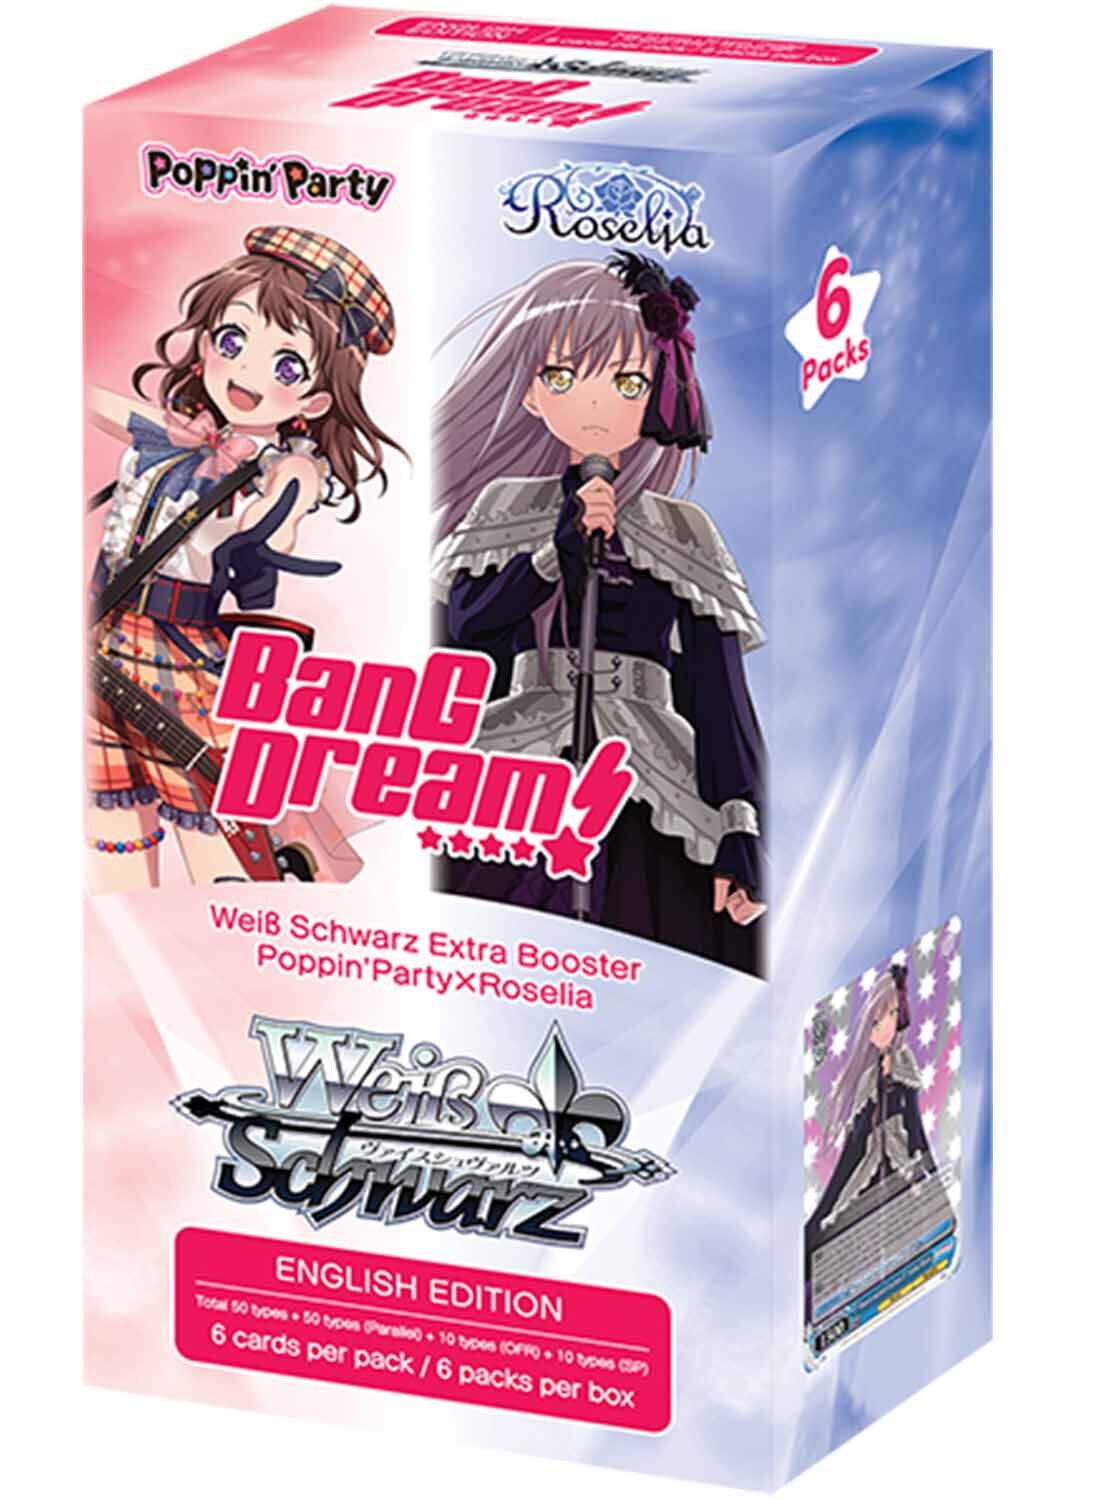 BanG Dream! Poppin Party x Roselia Extra Booster Display - Weiss Schwarz TCG - EN